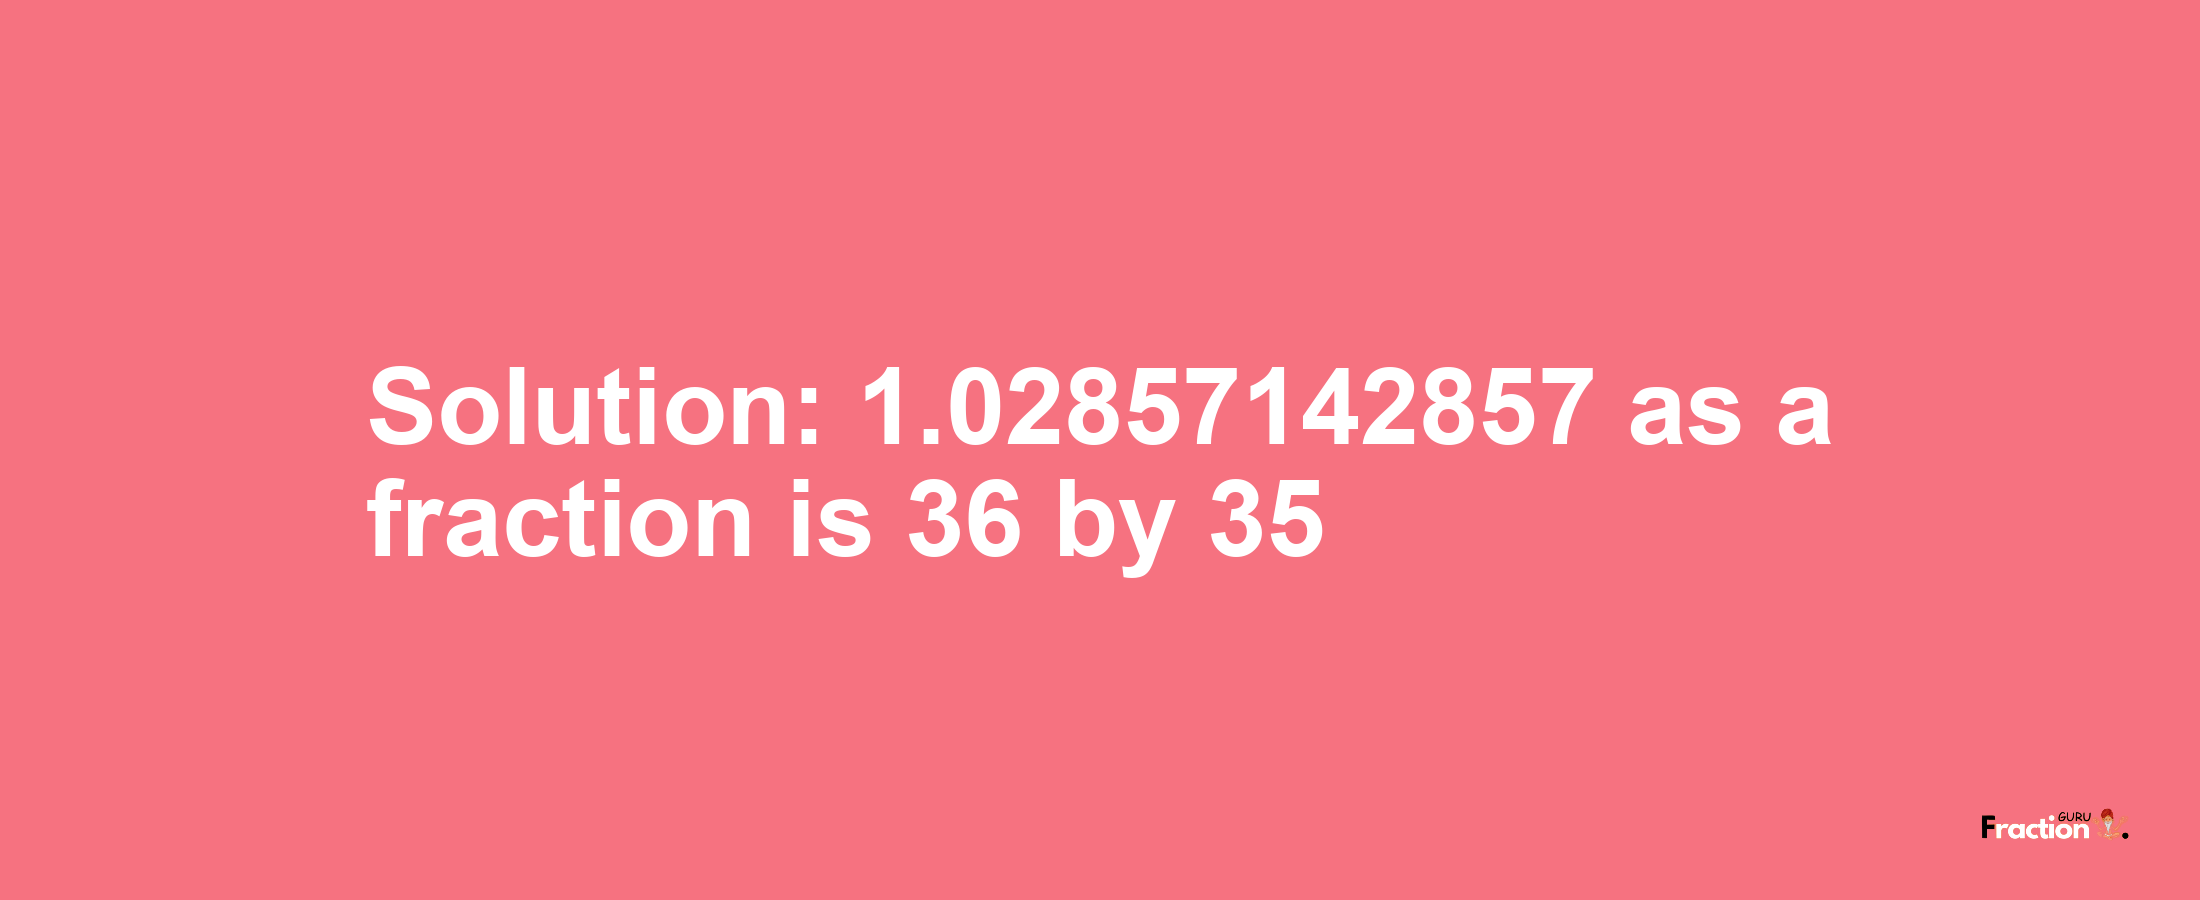 Solution:1.02857142857 as a fraction is 36/35